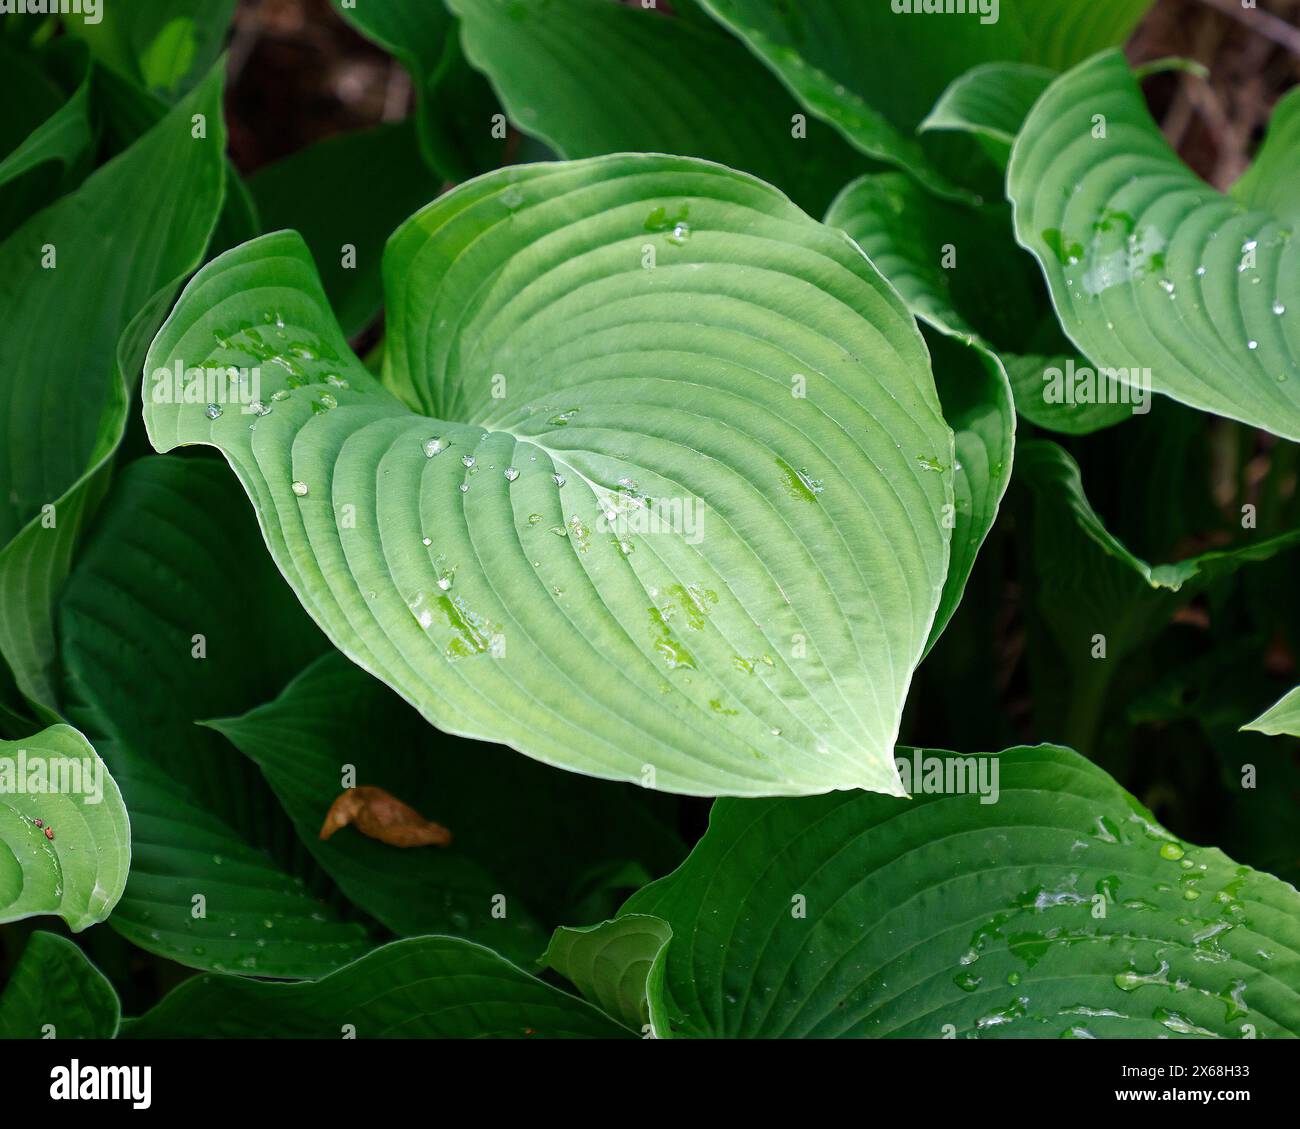 Closeup of the large green leaves of the herbaceous perennial groundcover plant hosta fortunei. Stock Photo